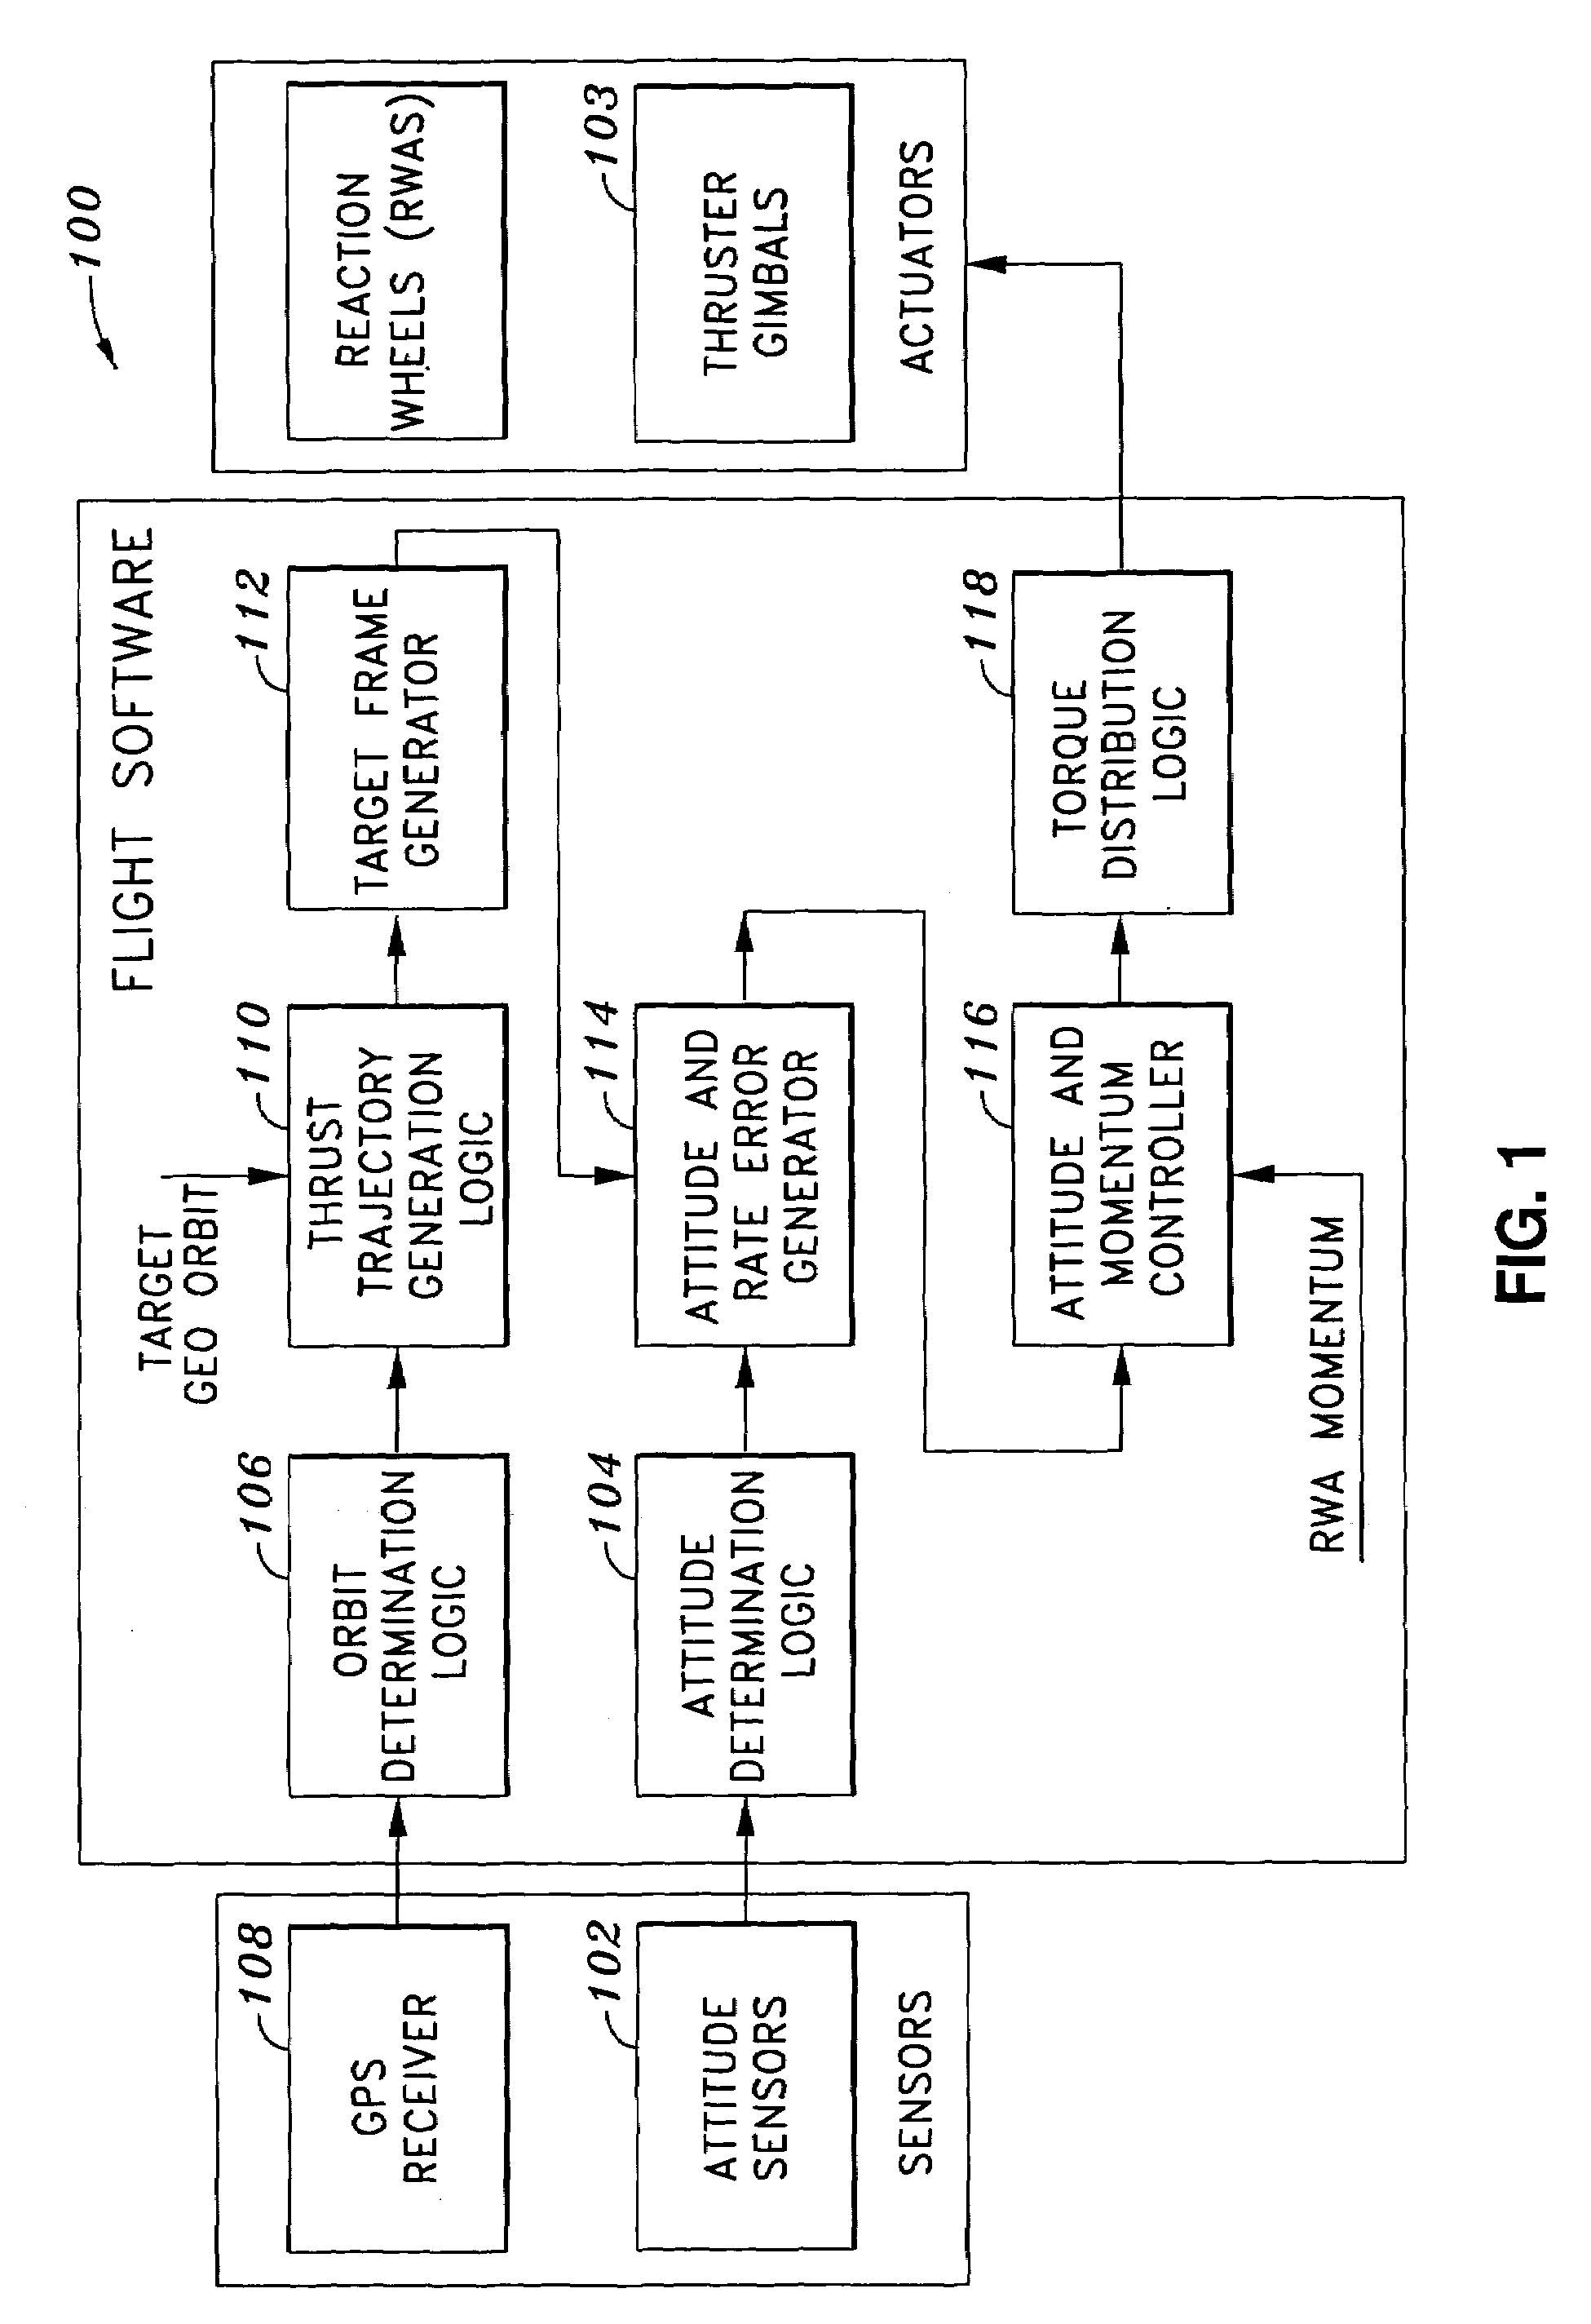 System and method of substantially autonomous geosynchronous time-optimal orbit transfer